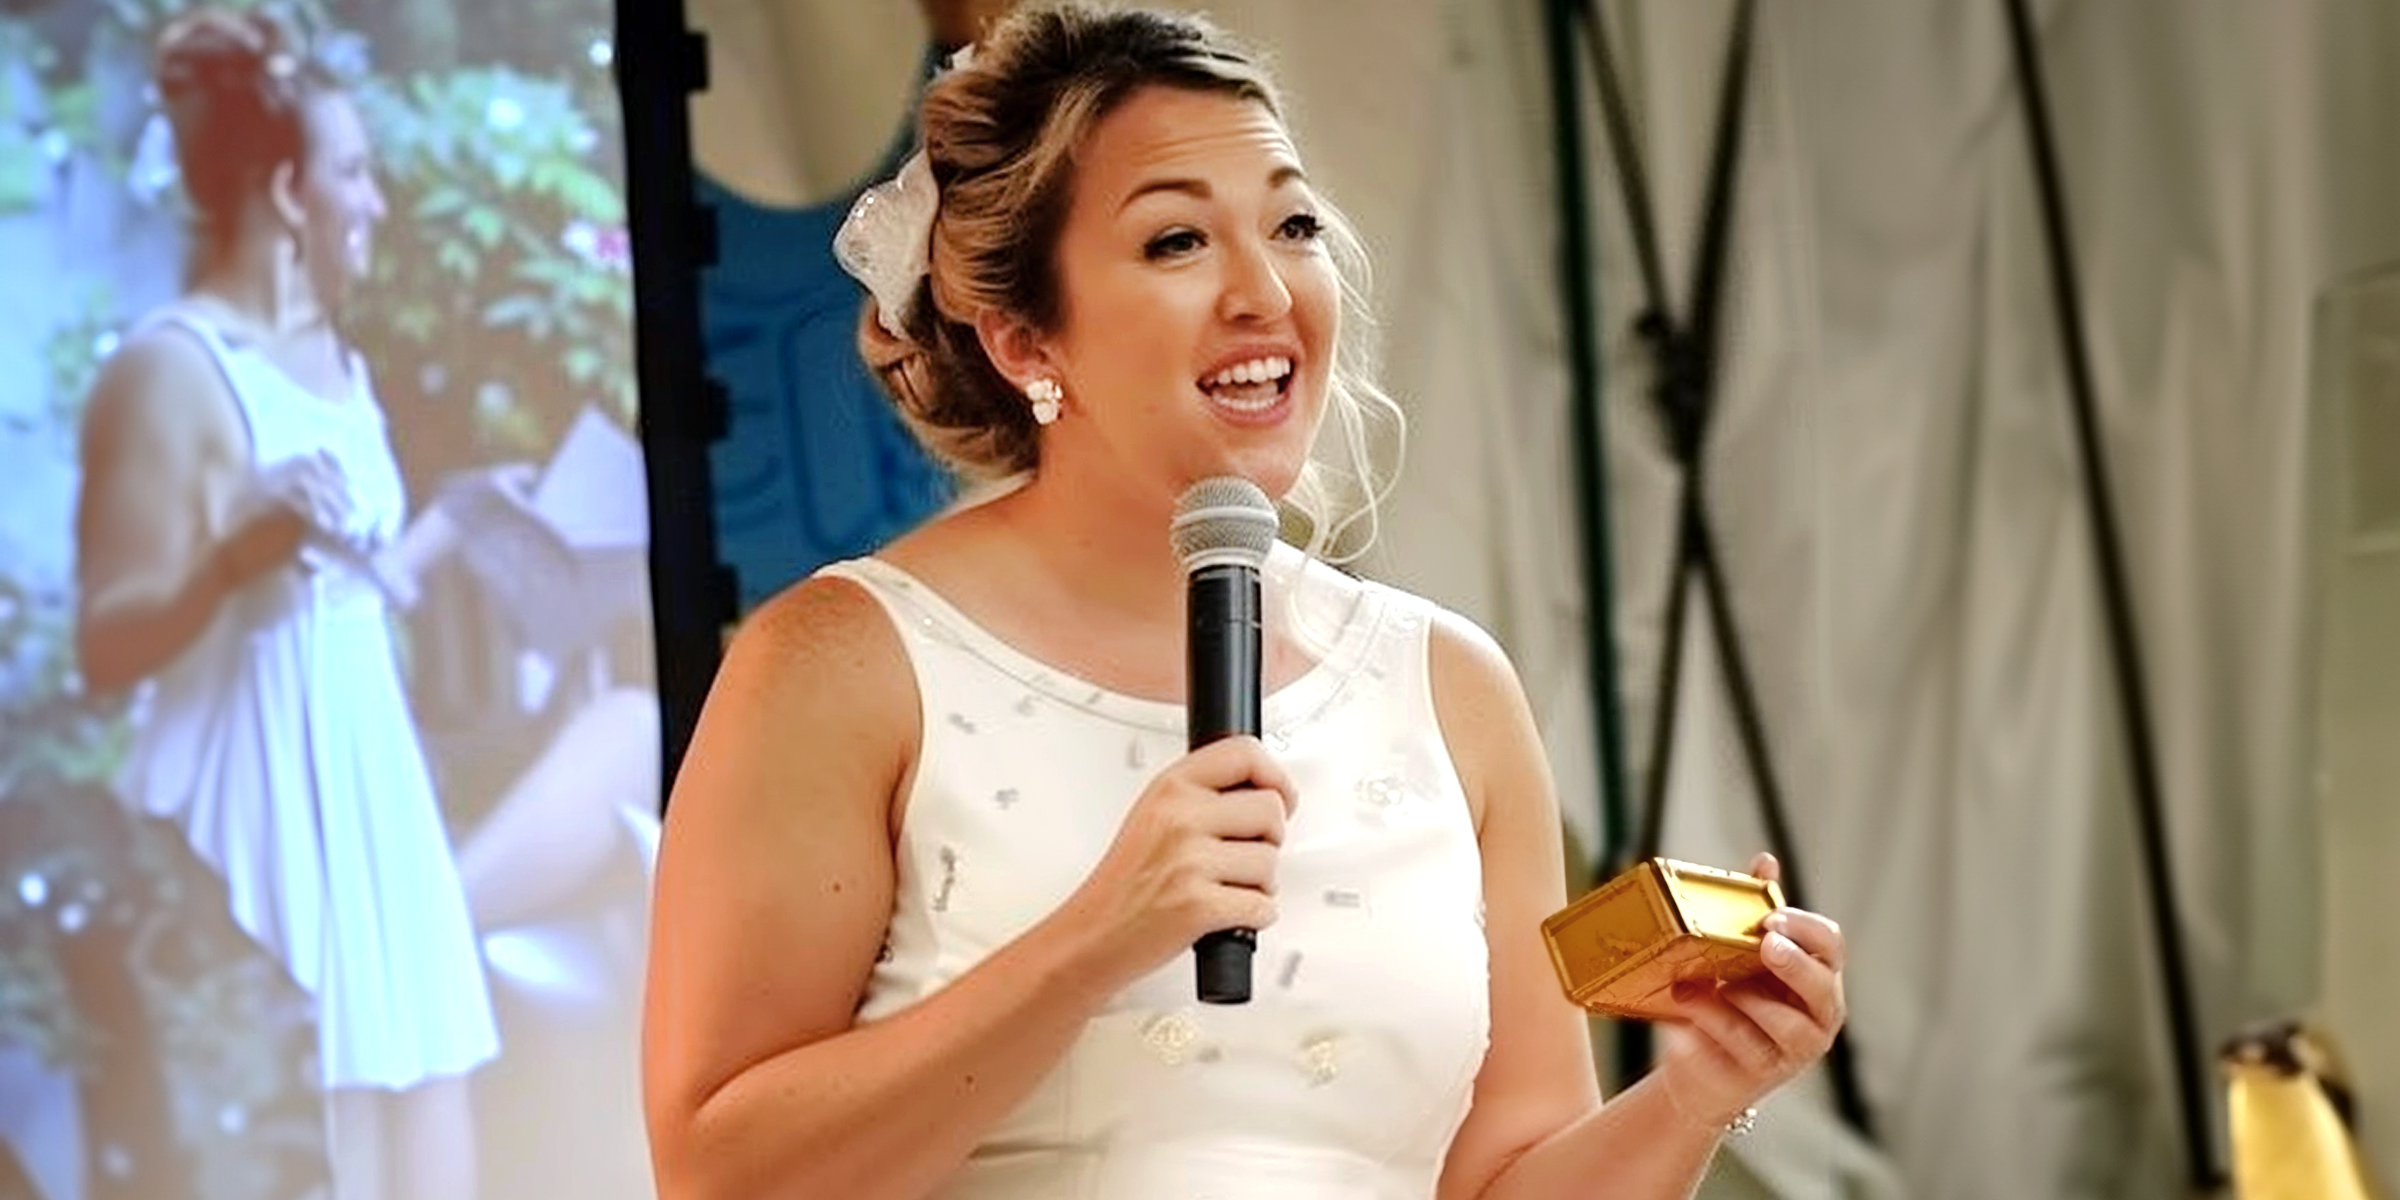 A woman giving a speech at a wedding while holding a small box | Source: AmoMama